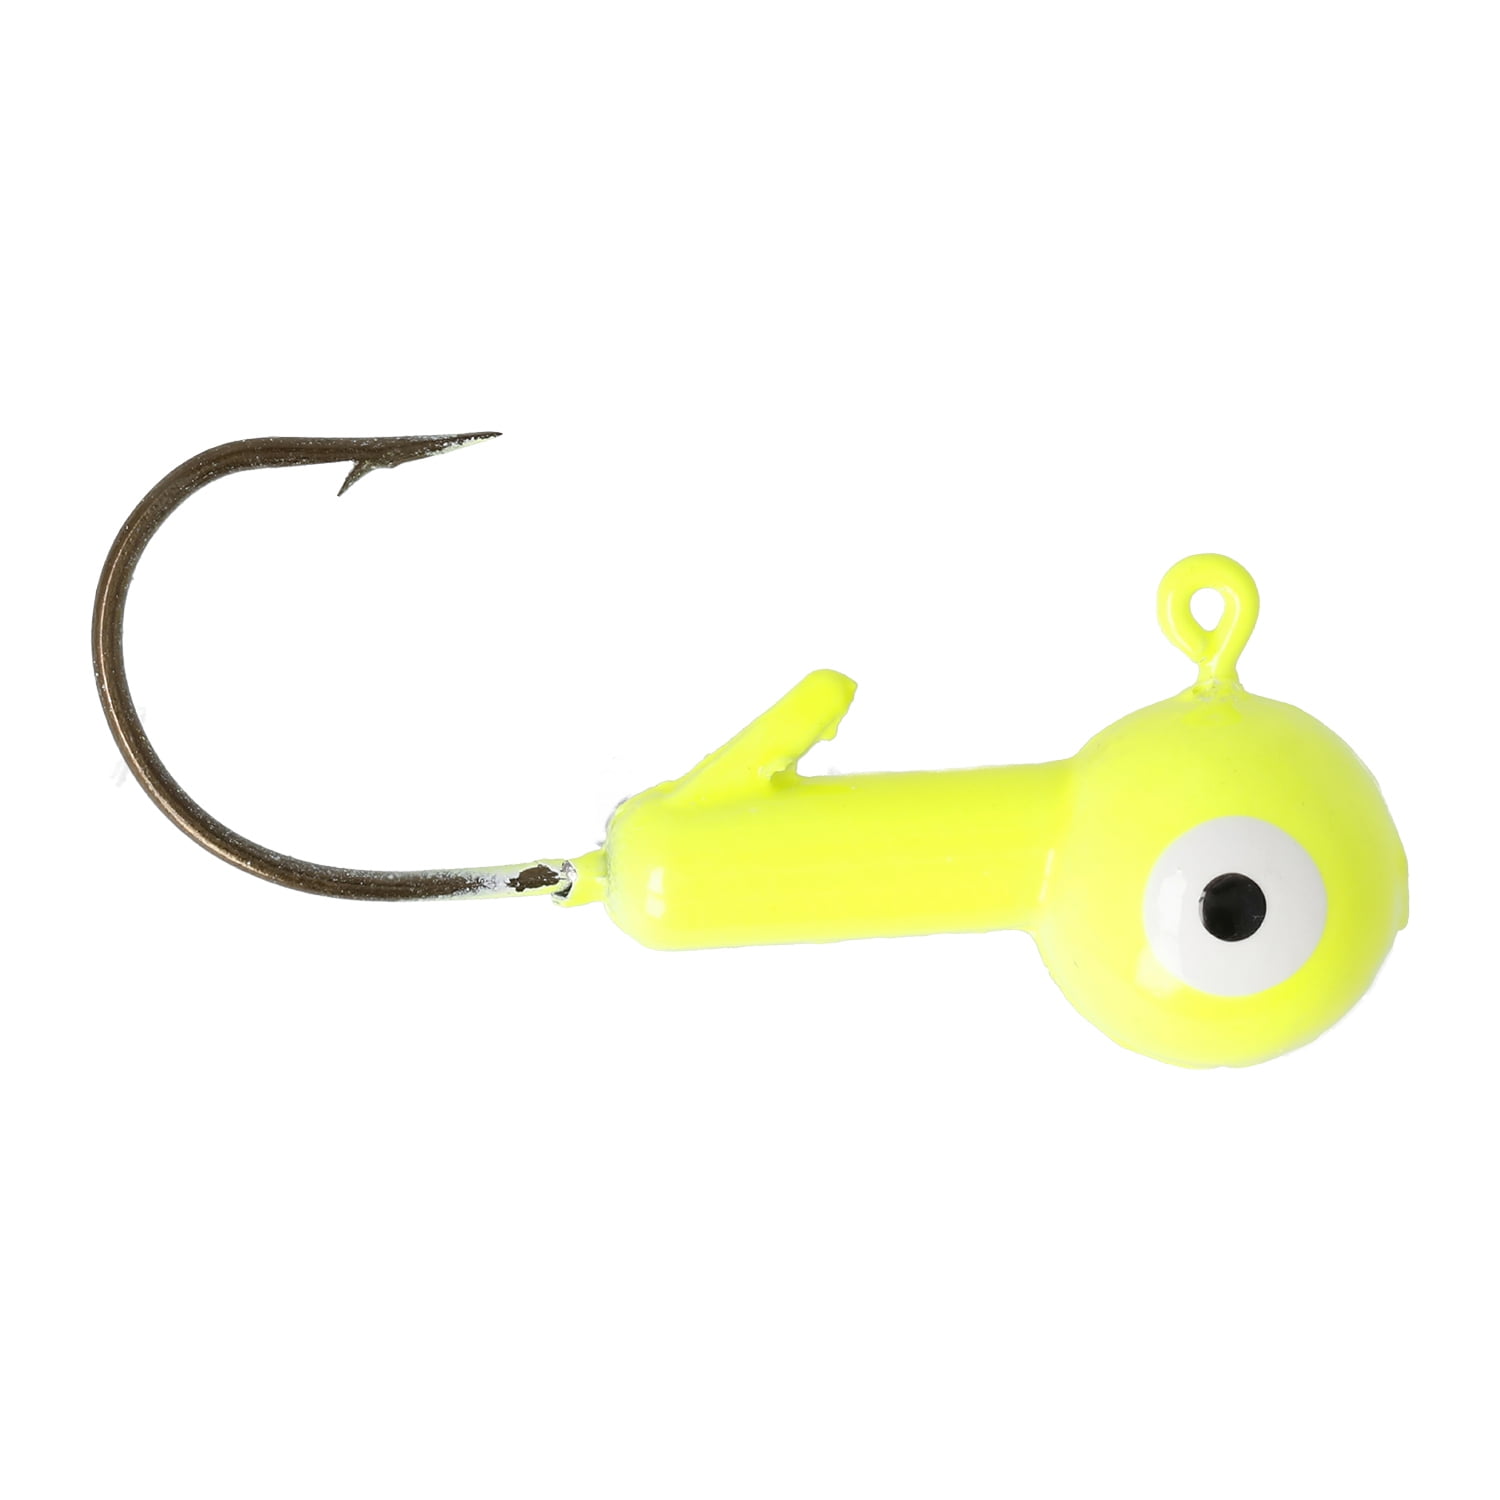 Eagle Claw Ball Head Fishing Jig, White with Bronze Hook, 1/8 oz., 10 Count  